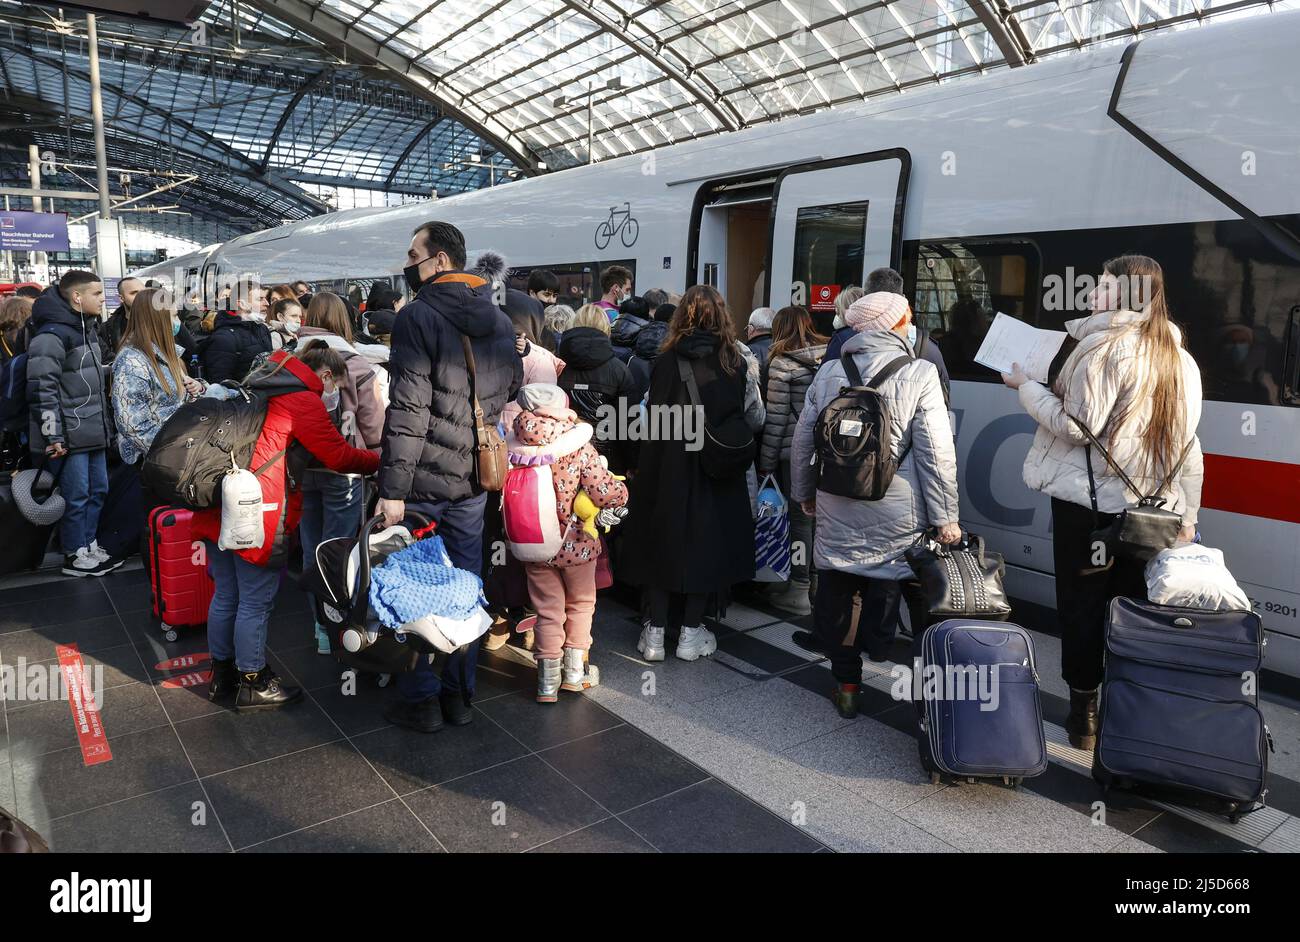 Berlin, 10.03.2022 - Refugees from Ukraine board a Deutsche Bahn ICE train for their onward journey at Berlin's main train station. Thousands of refugees from Ukraine have already arrived in Germany. [automated translation] Stock Photo